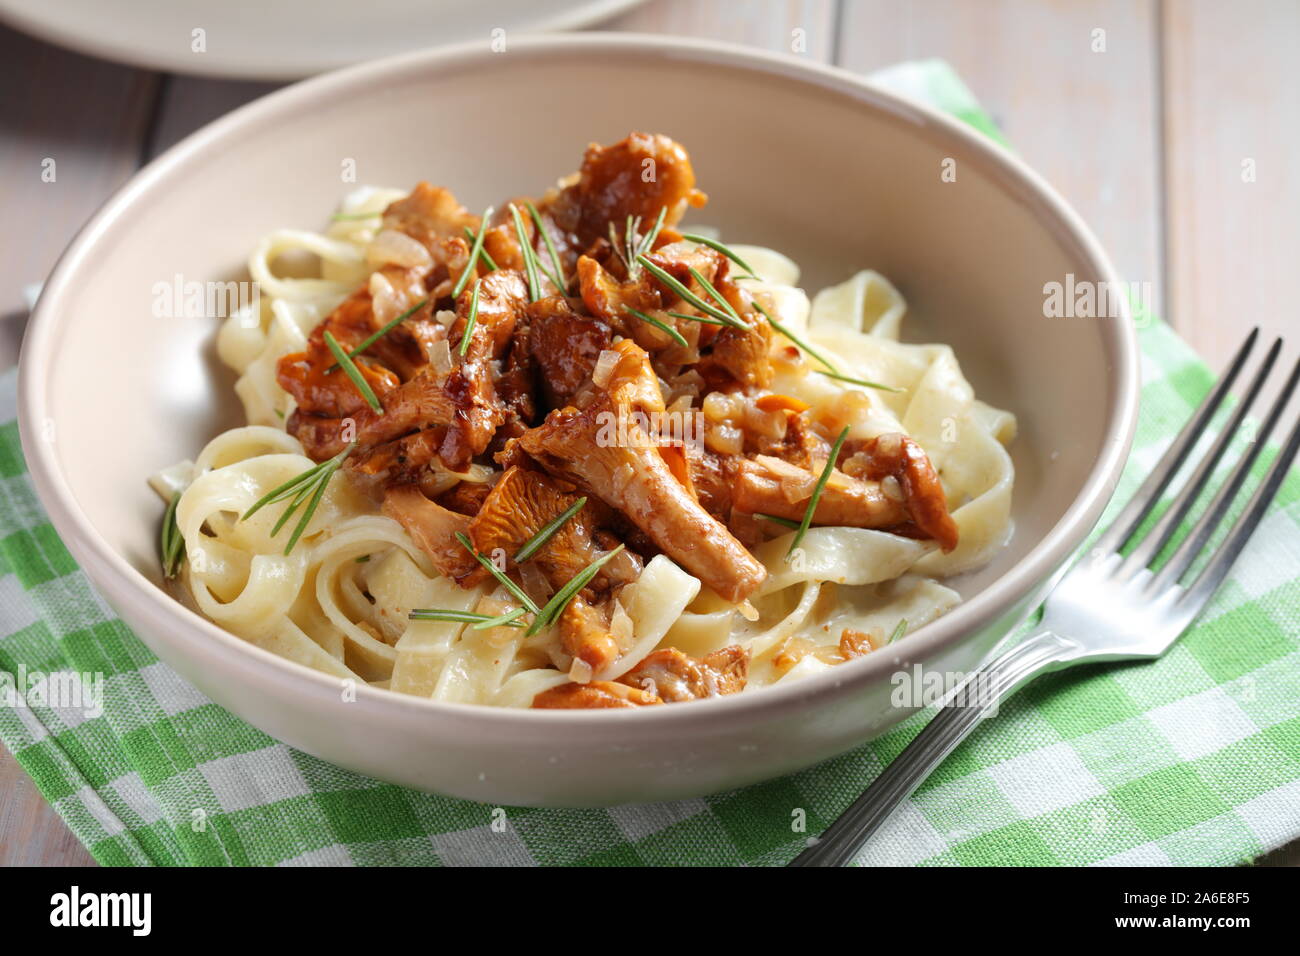 Fettuccine pasta with Chanterelle mushrooms and rosemary on a rustic table Stock Photo